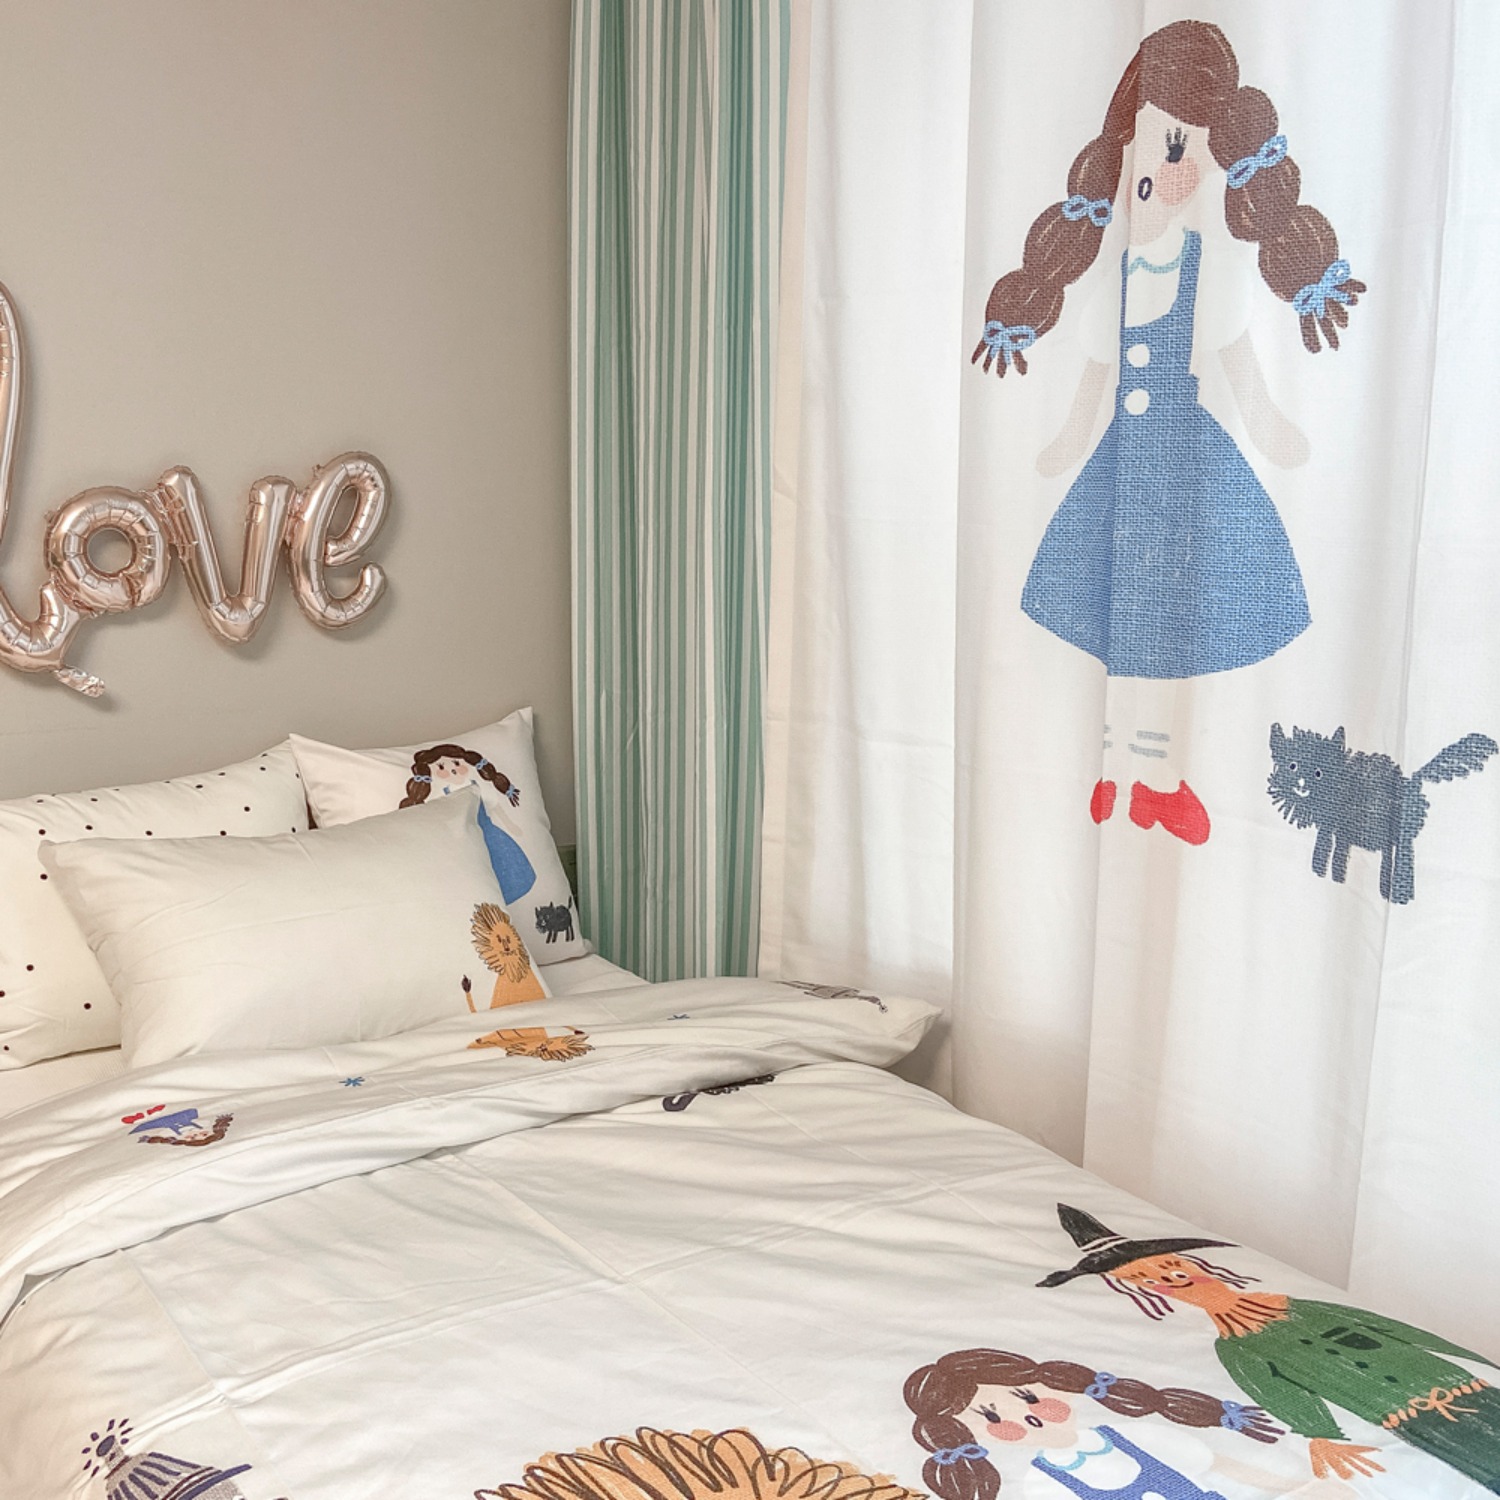 [drawing AMY] The Wizard Of Oz Bedding